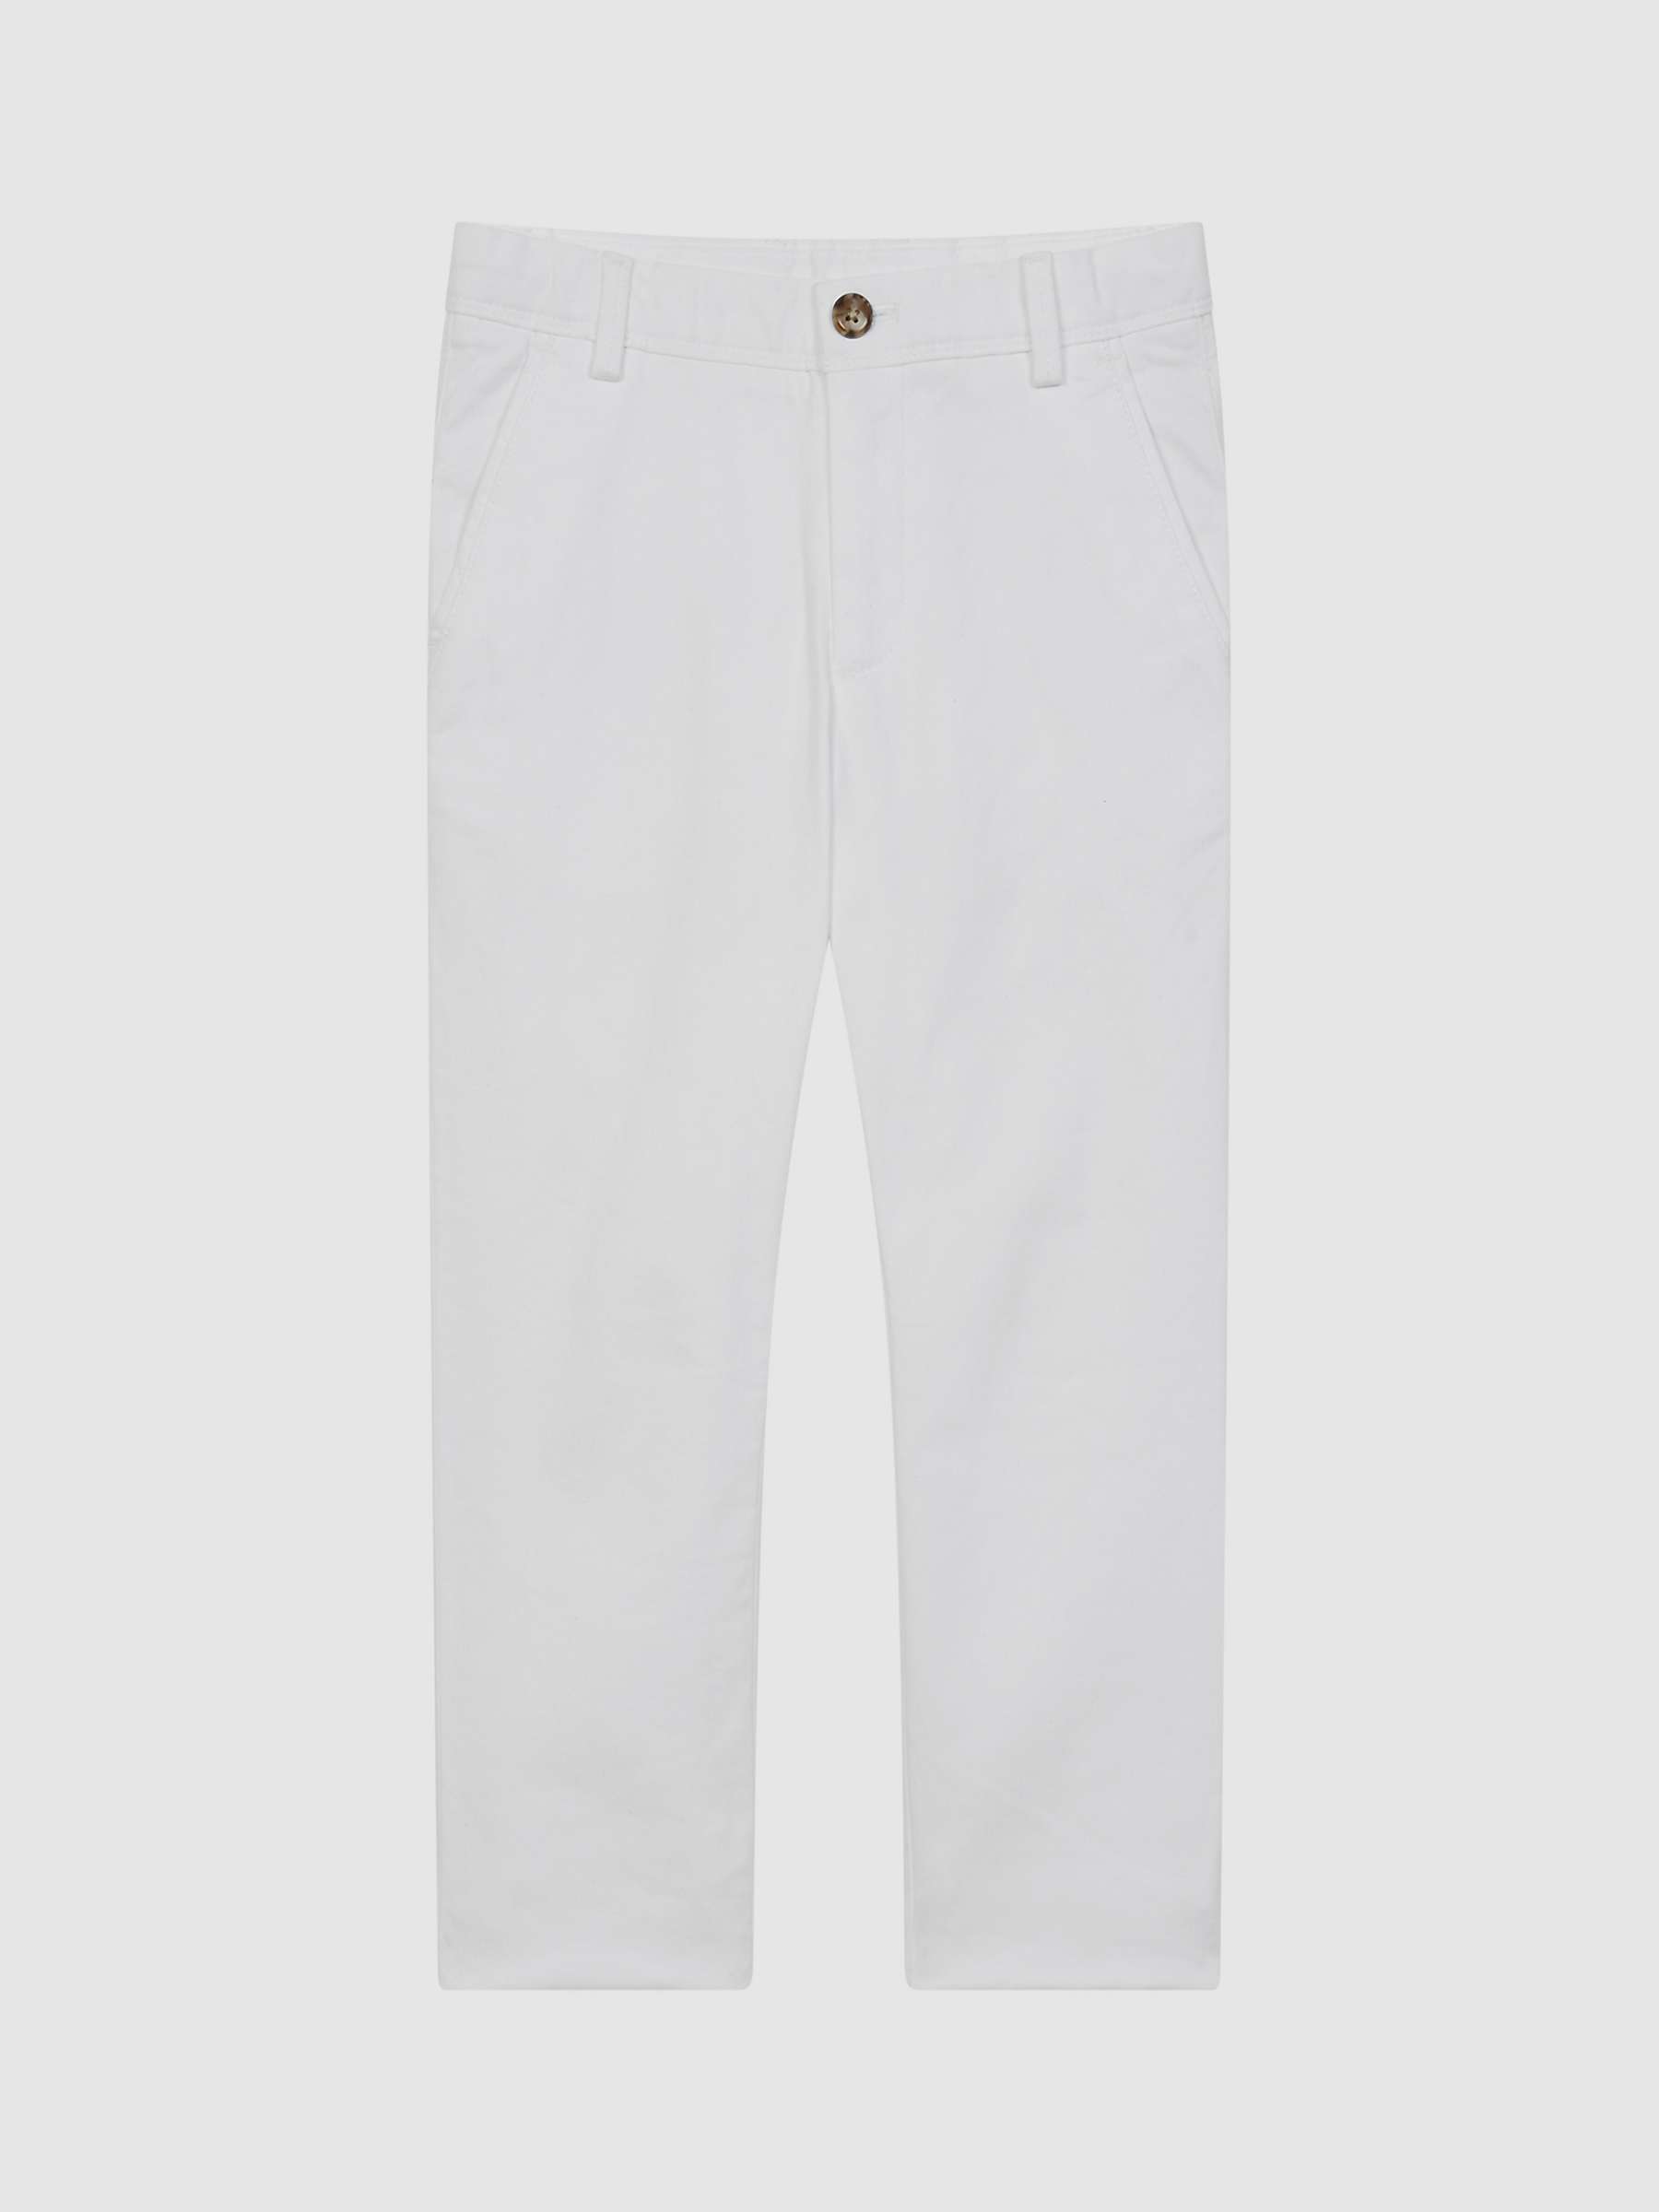 Reiss Kids' Pitch Slim Fit Chino Trousers, White at John Lewis & Partners